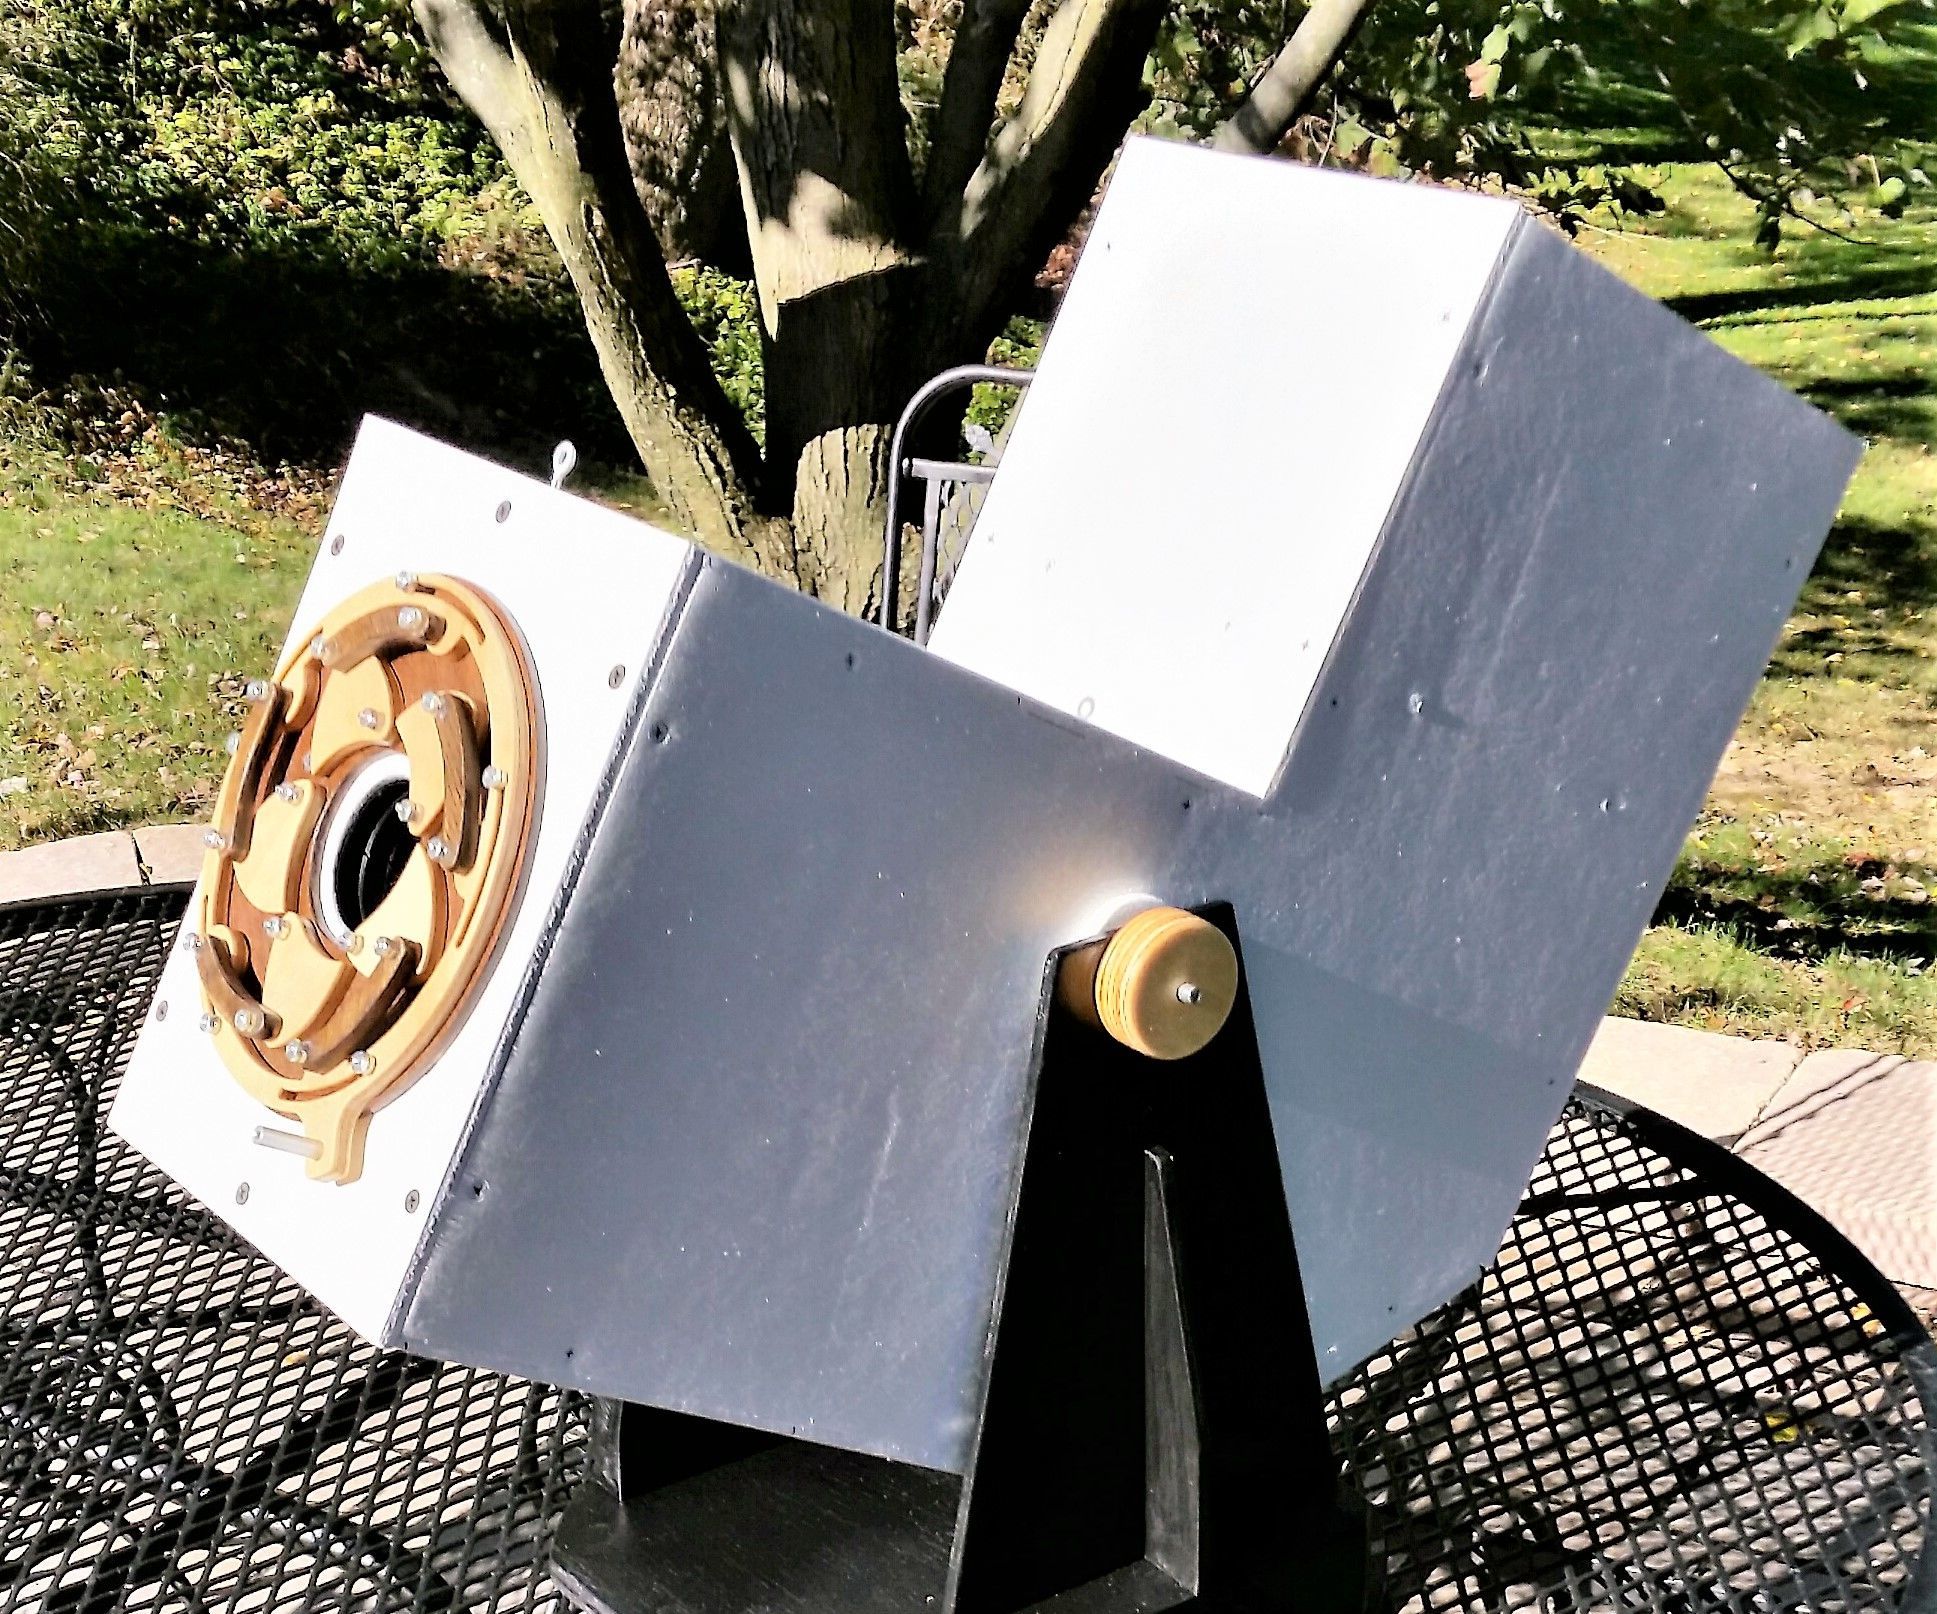 A Viewing Hood/Camera Mount for My Solar Projector